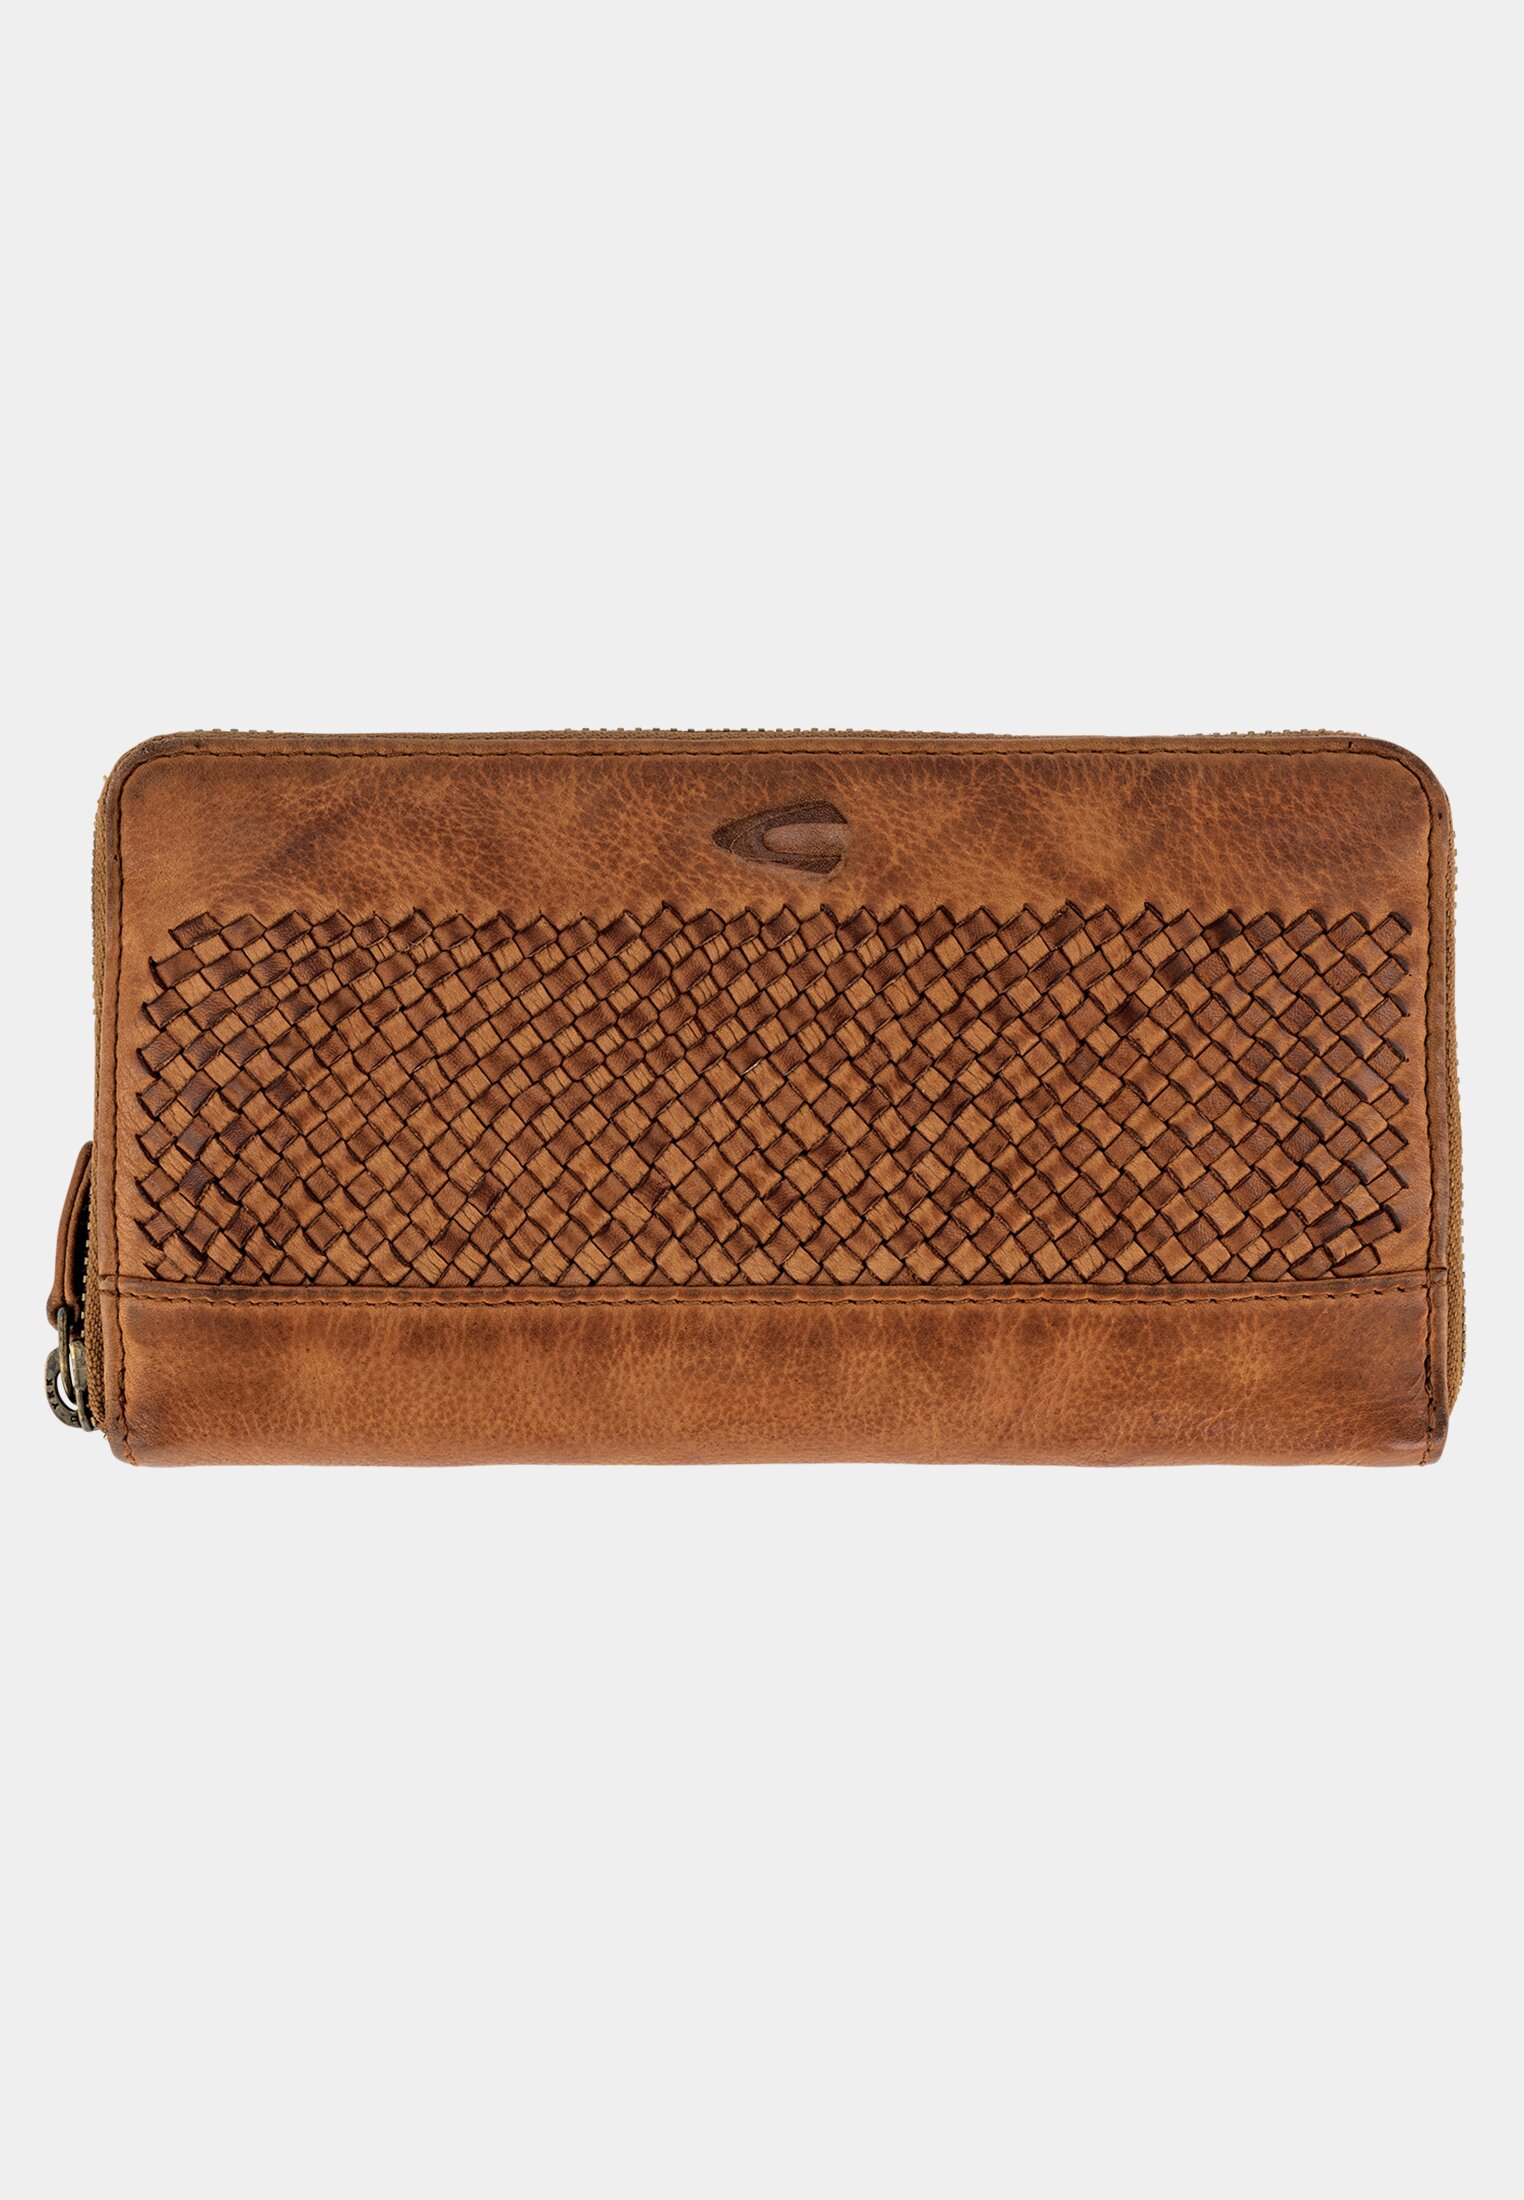 Camel Active Long zip wallet with hand woven leather details